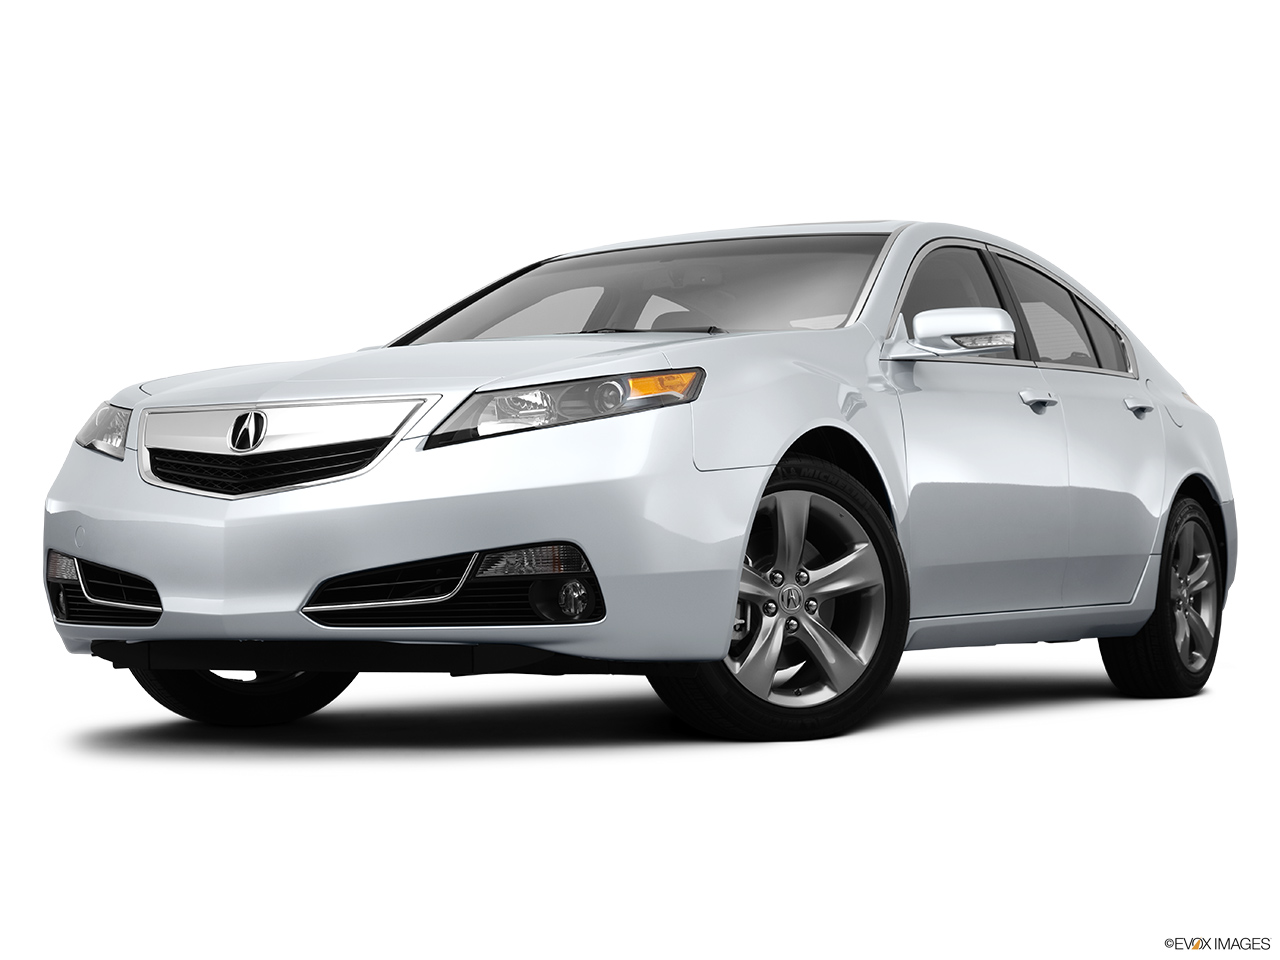 2013 Acura TL SH-AWD Front angle view, low wide perspective. 